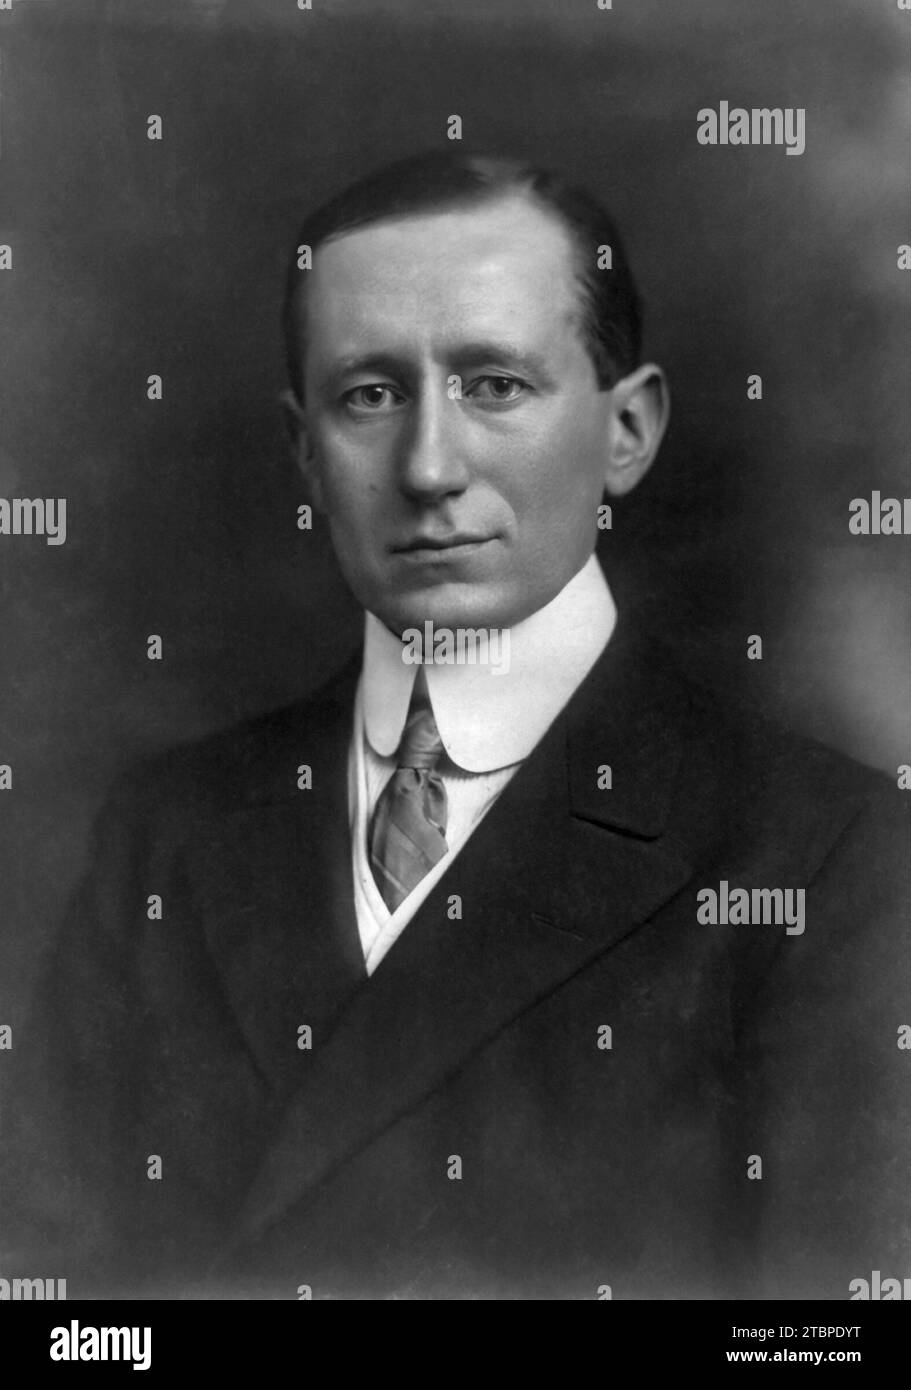 Guglielmo Marconi, portrait, head and shoulders, facing left. Year: 1908. Photographers: Pach Brothers. Stock Photo